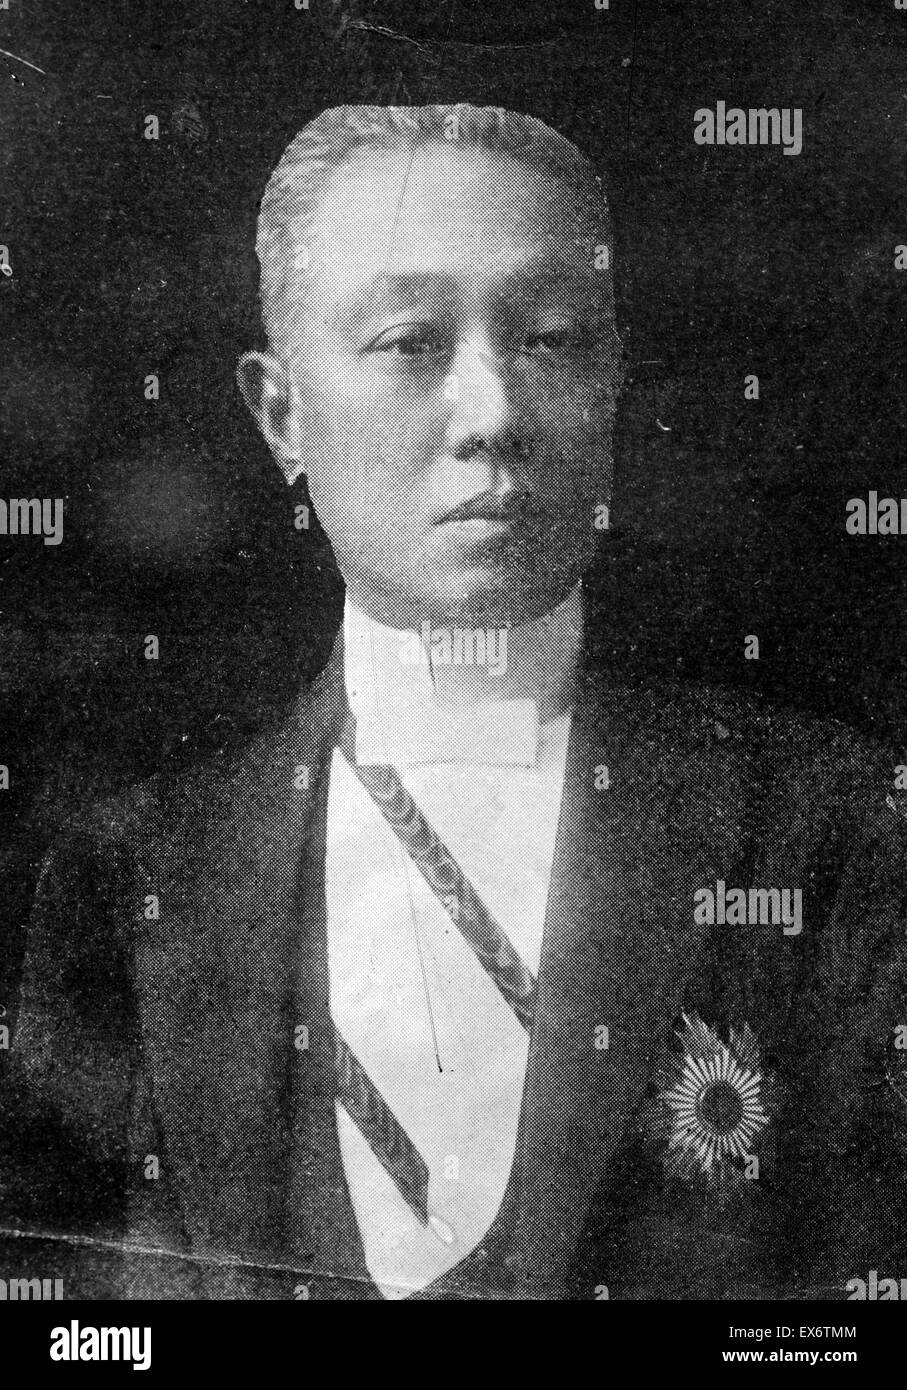 Prince Saionji Kinmochi (1849-1940). Japanese politician, statesman and twice Prime Minister of Japan; From January 7, 1906 to July 14, 1908, and again from August 30, 1911 to December 21, 1912 Stock Photo